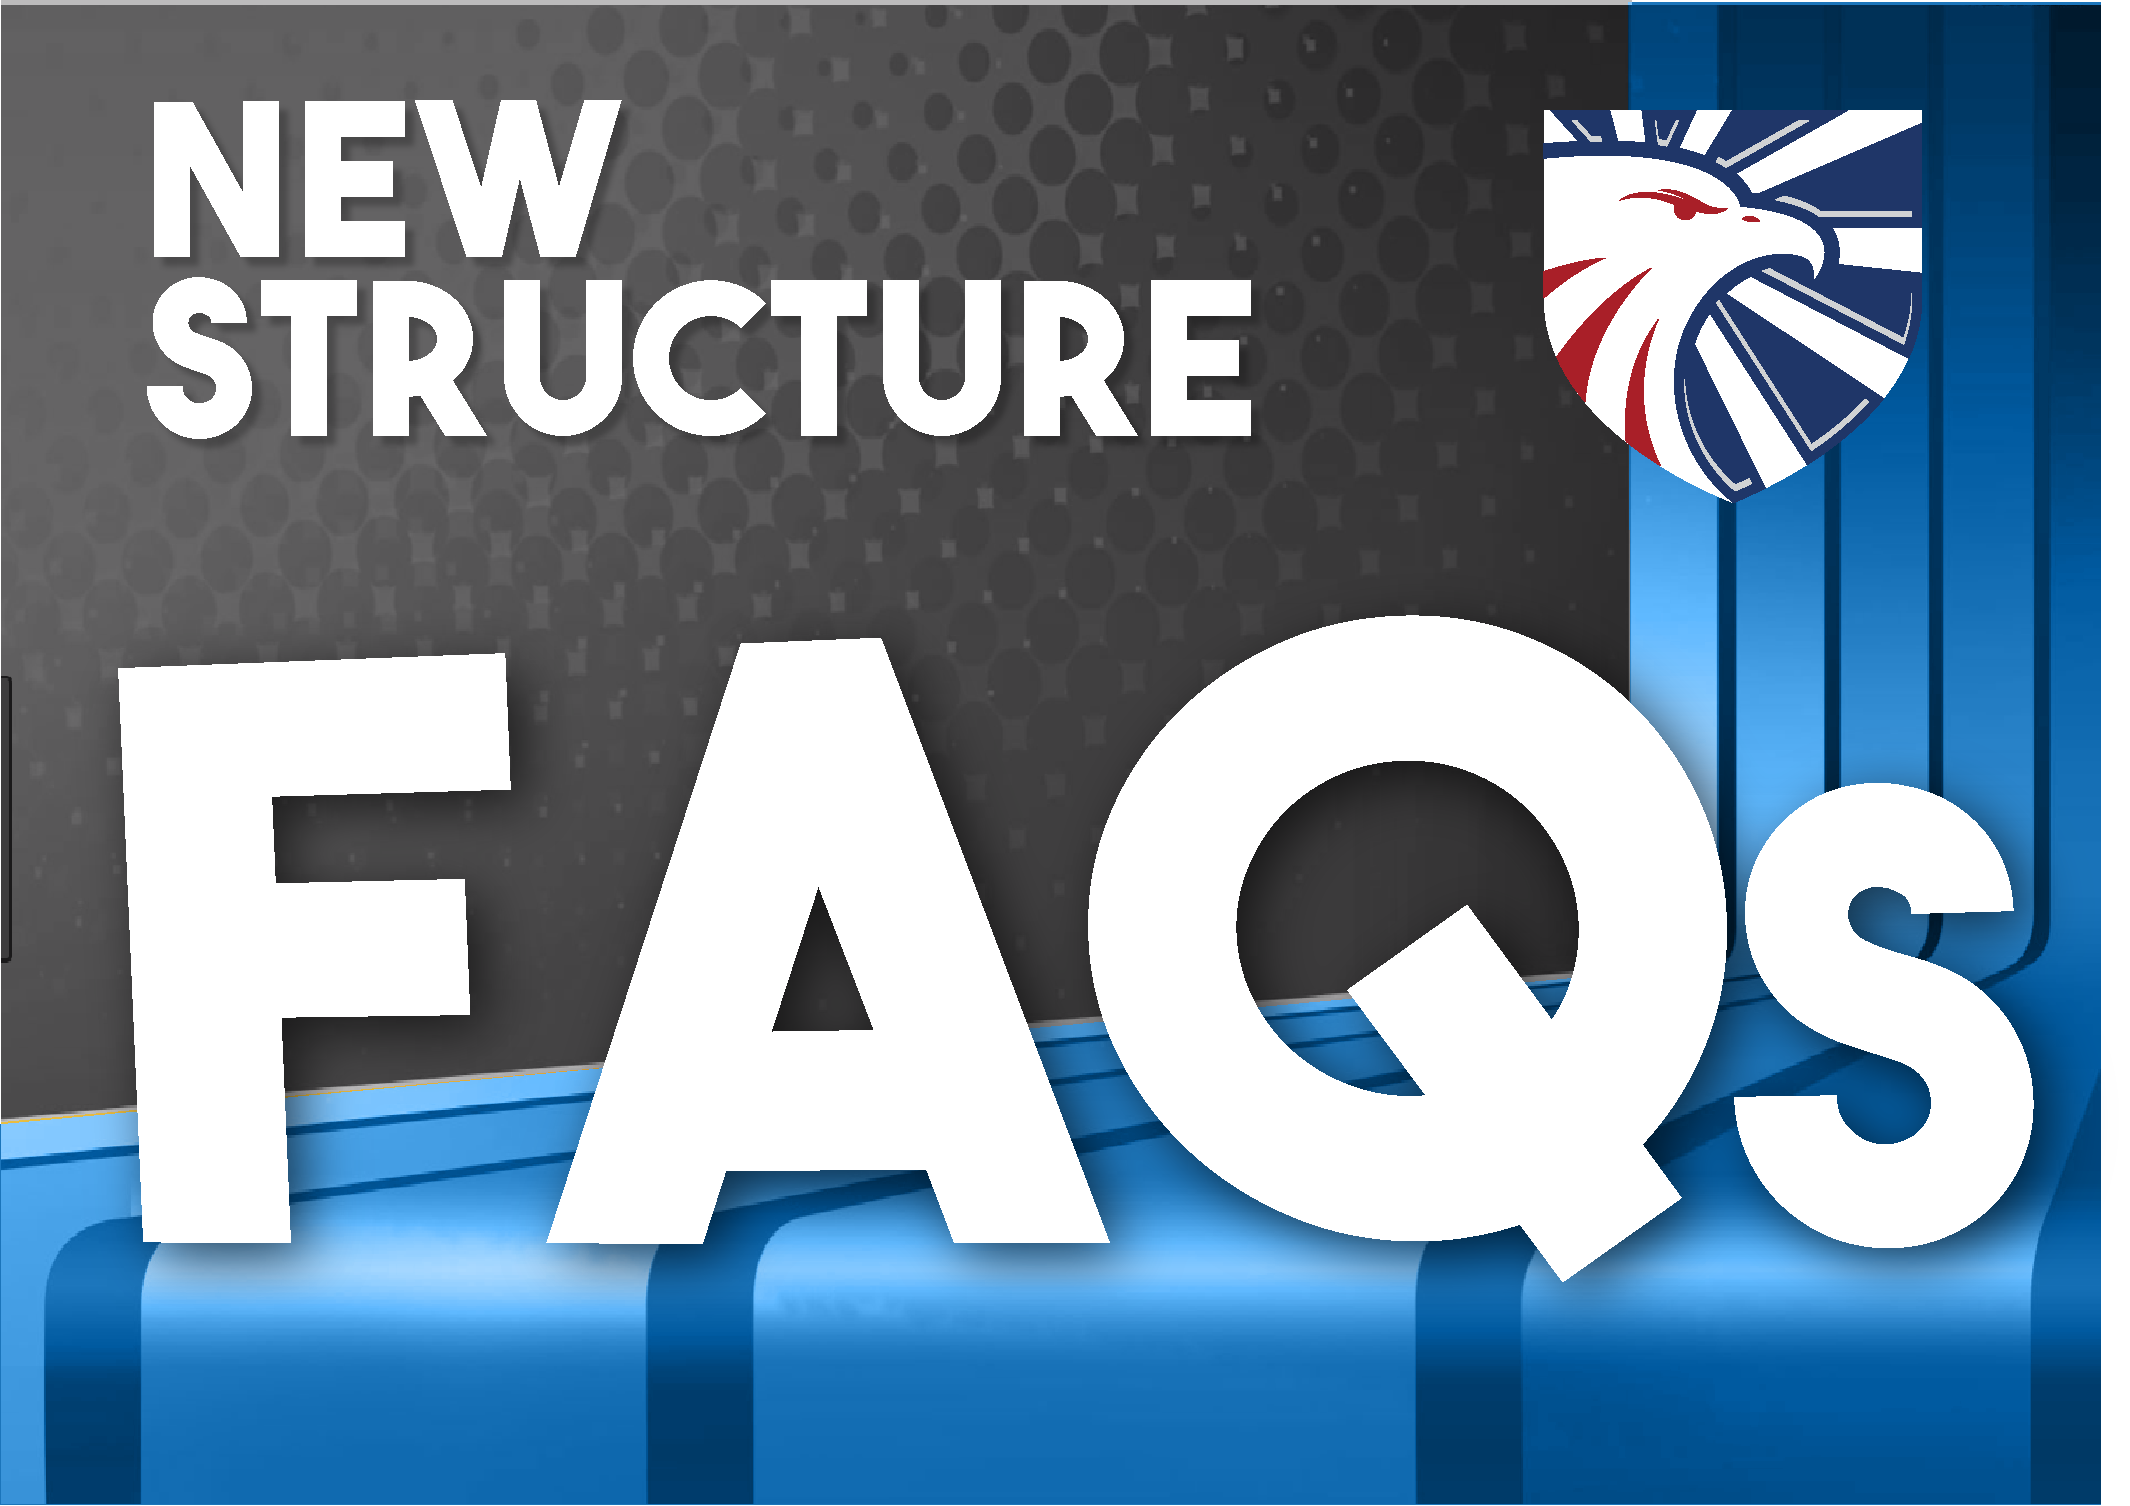 New Structure FAQs